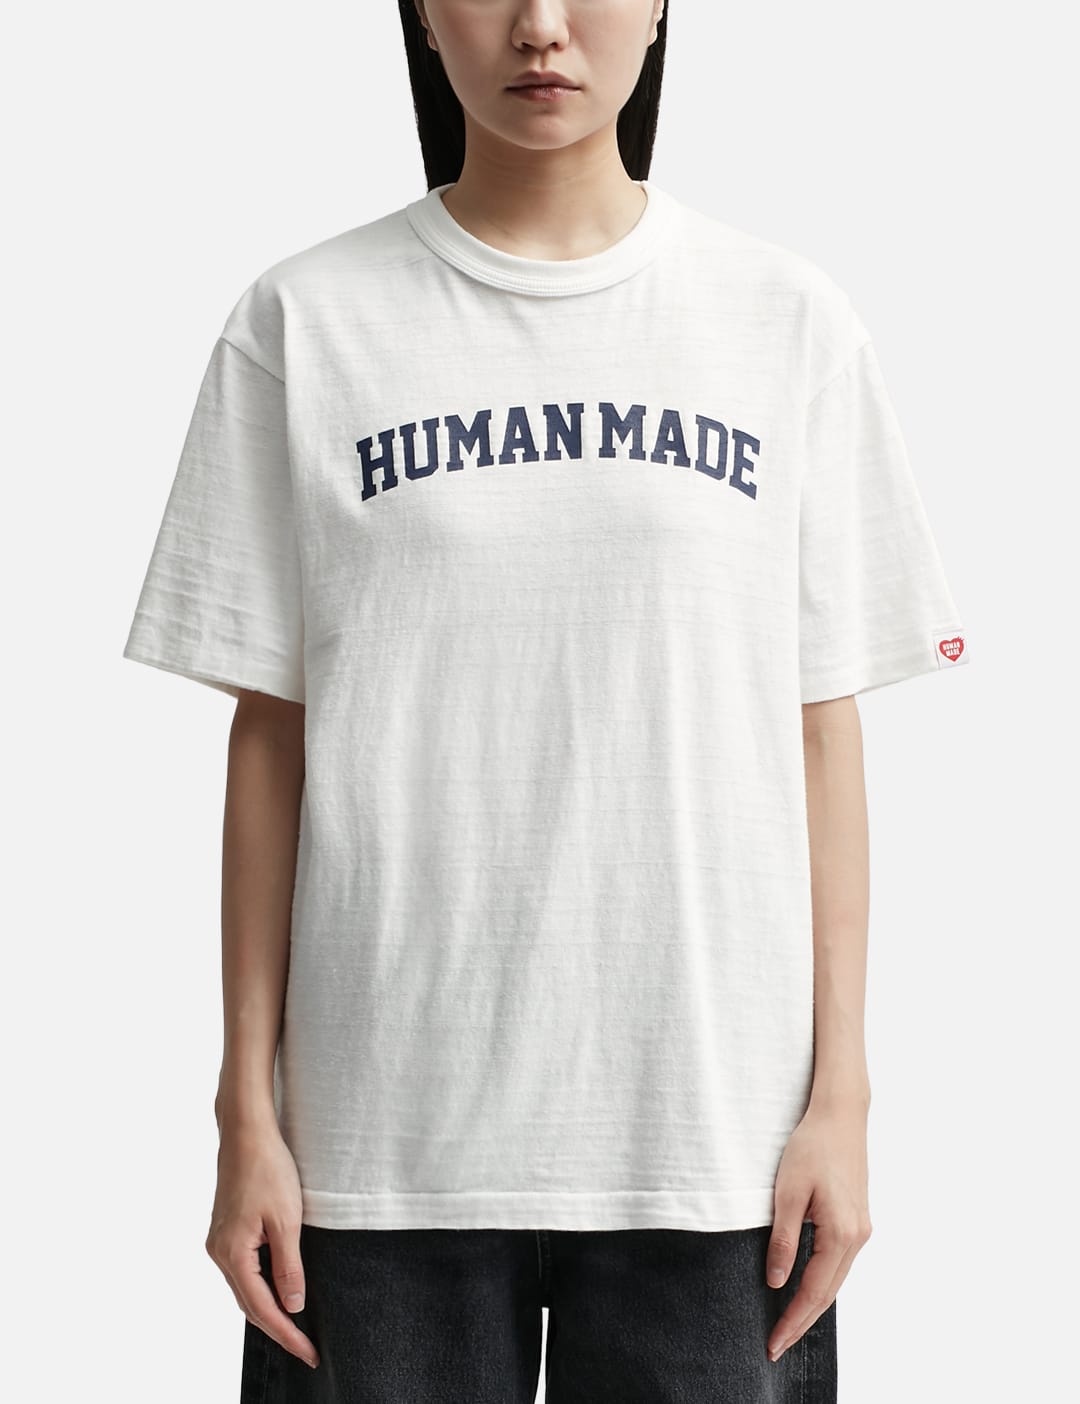 Human Made Graphic T-shirt #06 In White | ModeSens